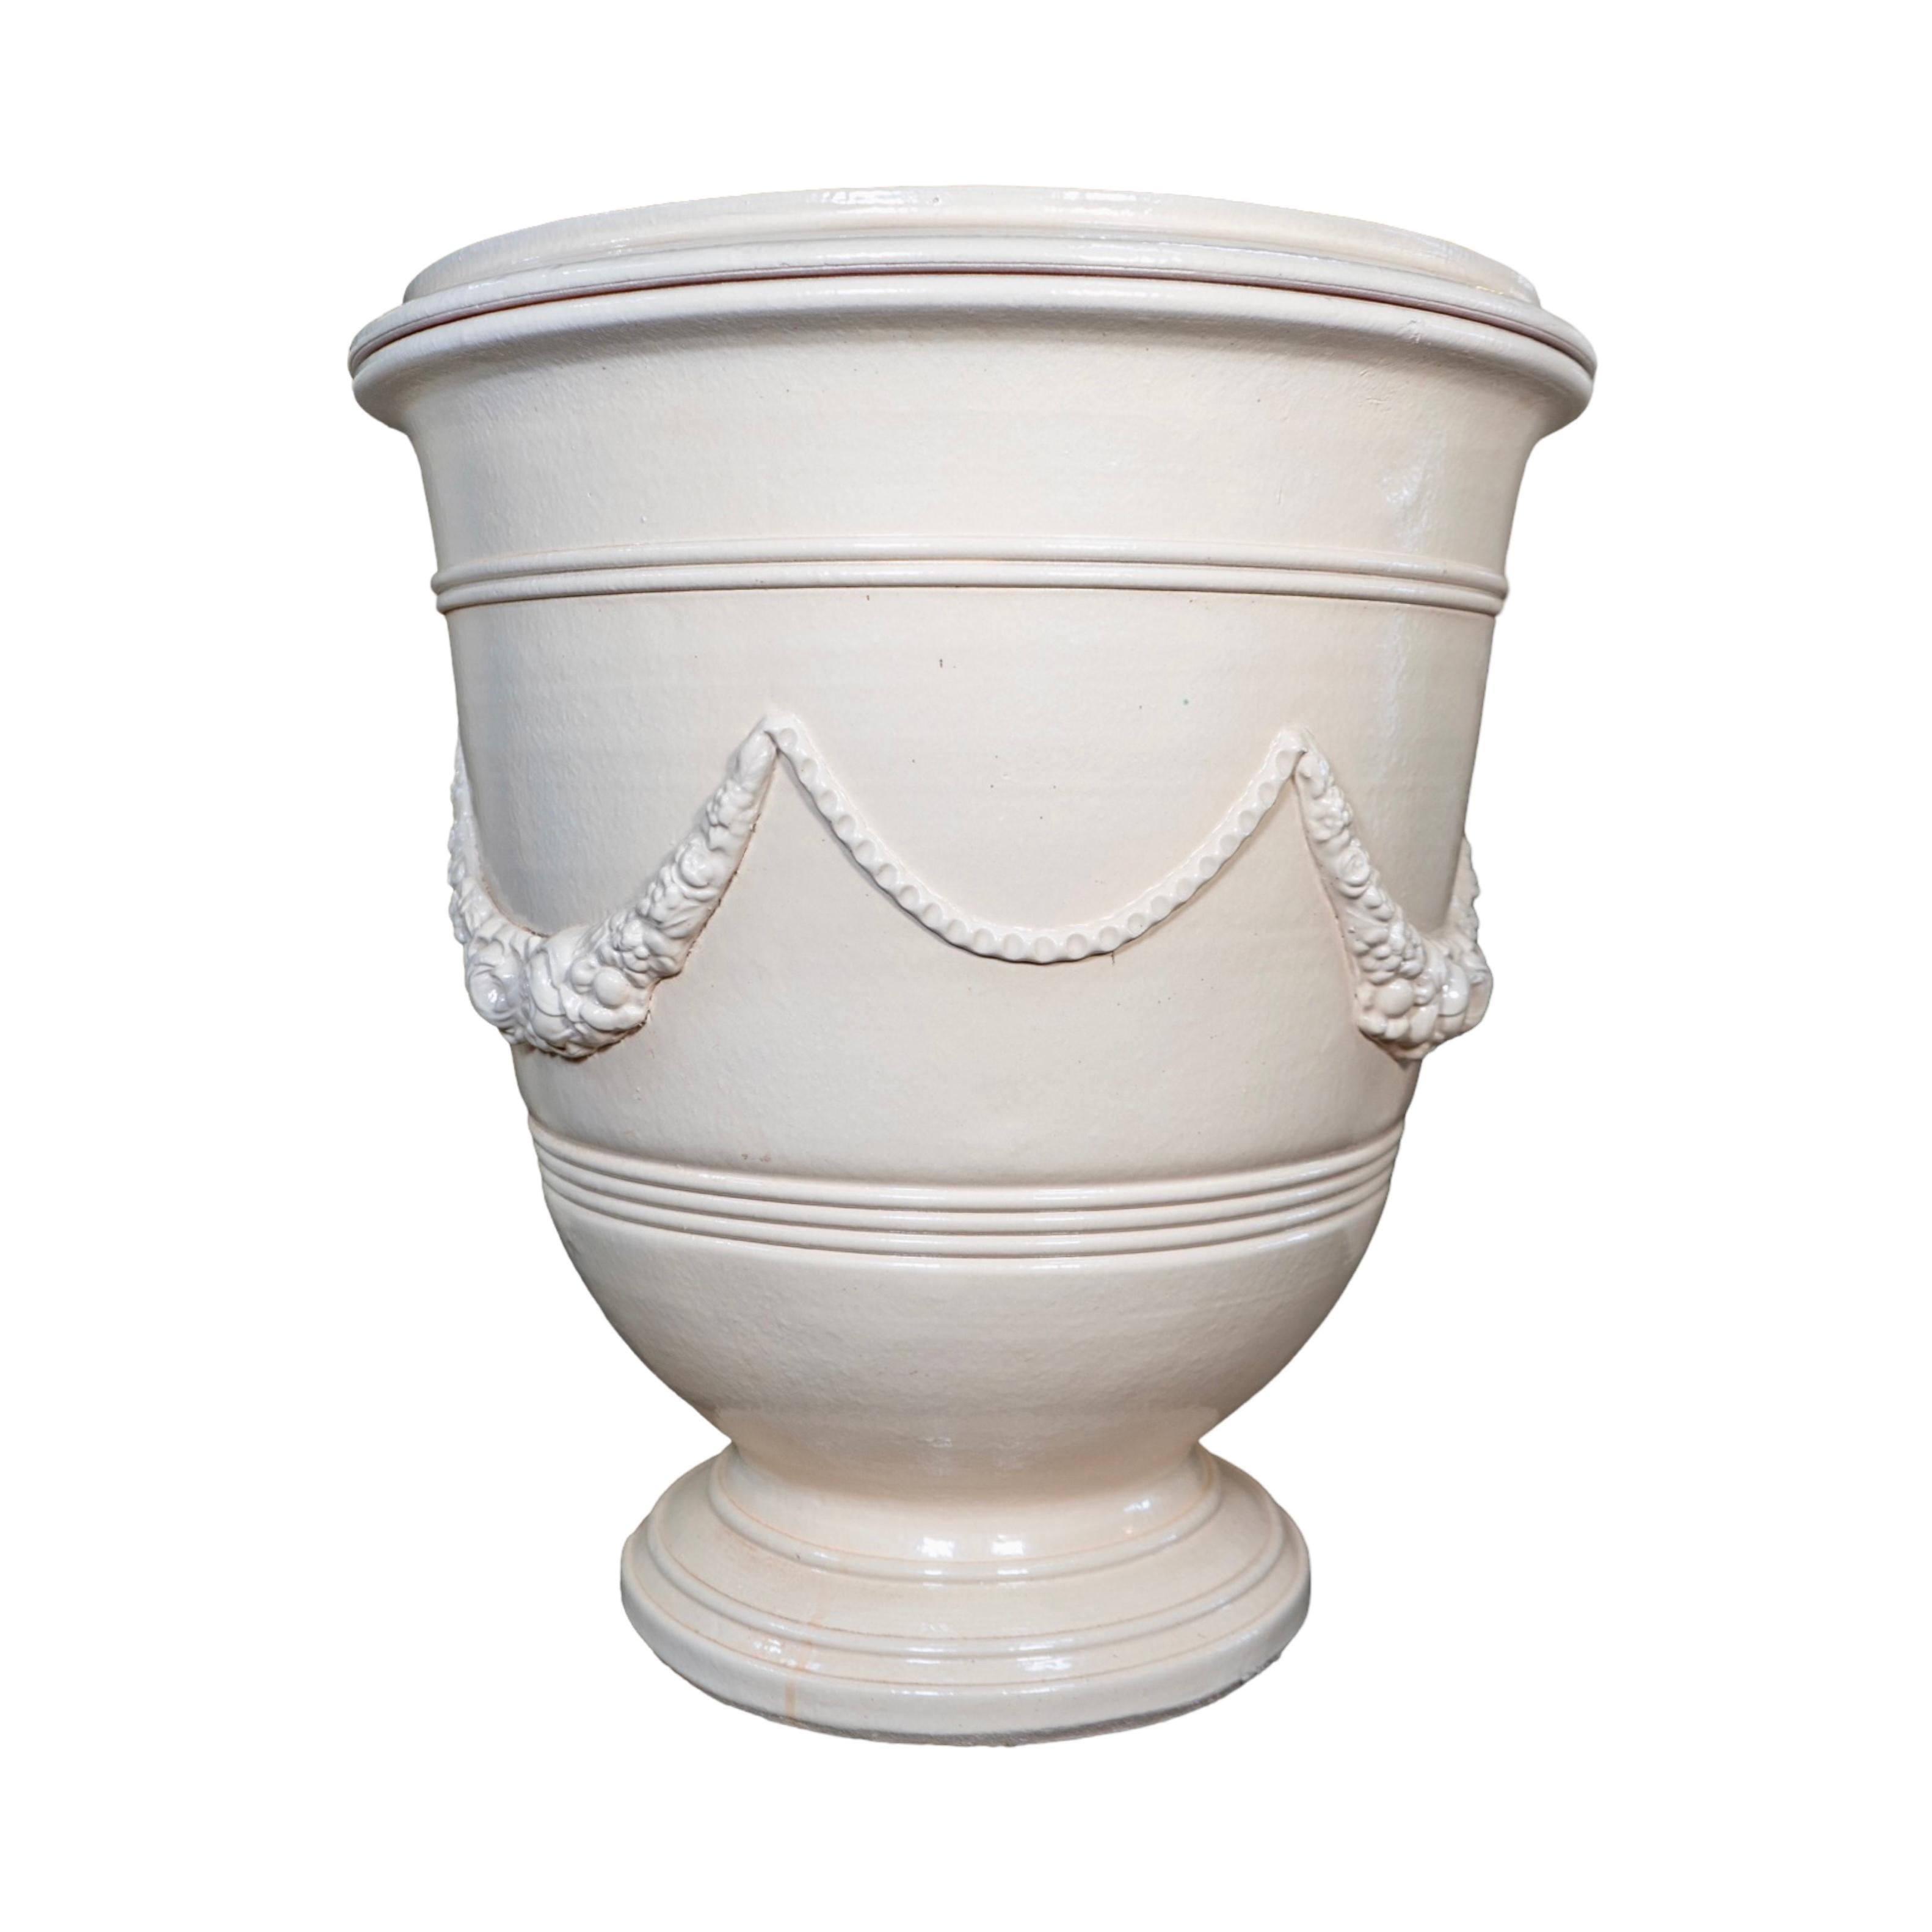 Handmade in France, this French Terracotta Glazed Anduze Planter features an elegant anduze garden wreath swag design with a glazed beige paint finish. Available in two sizes, this is the medium size. It adds a touch of sophistication to any garden